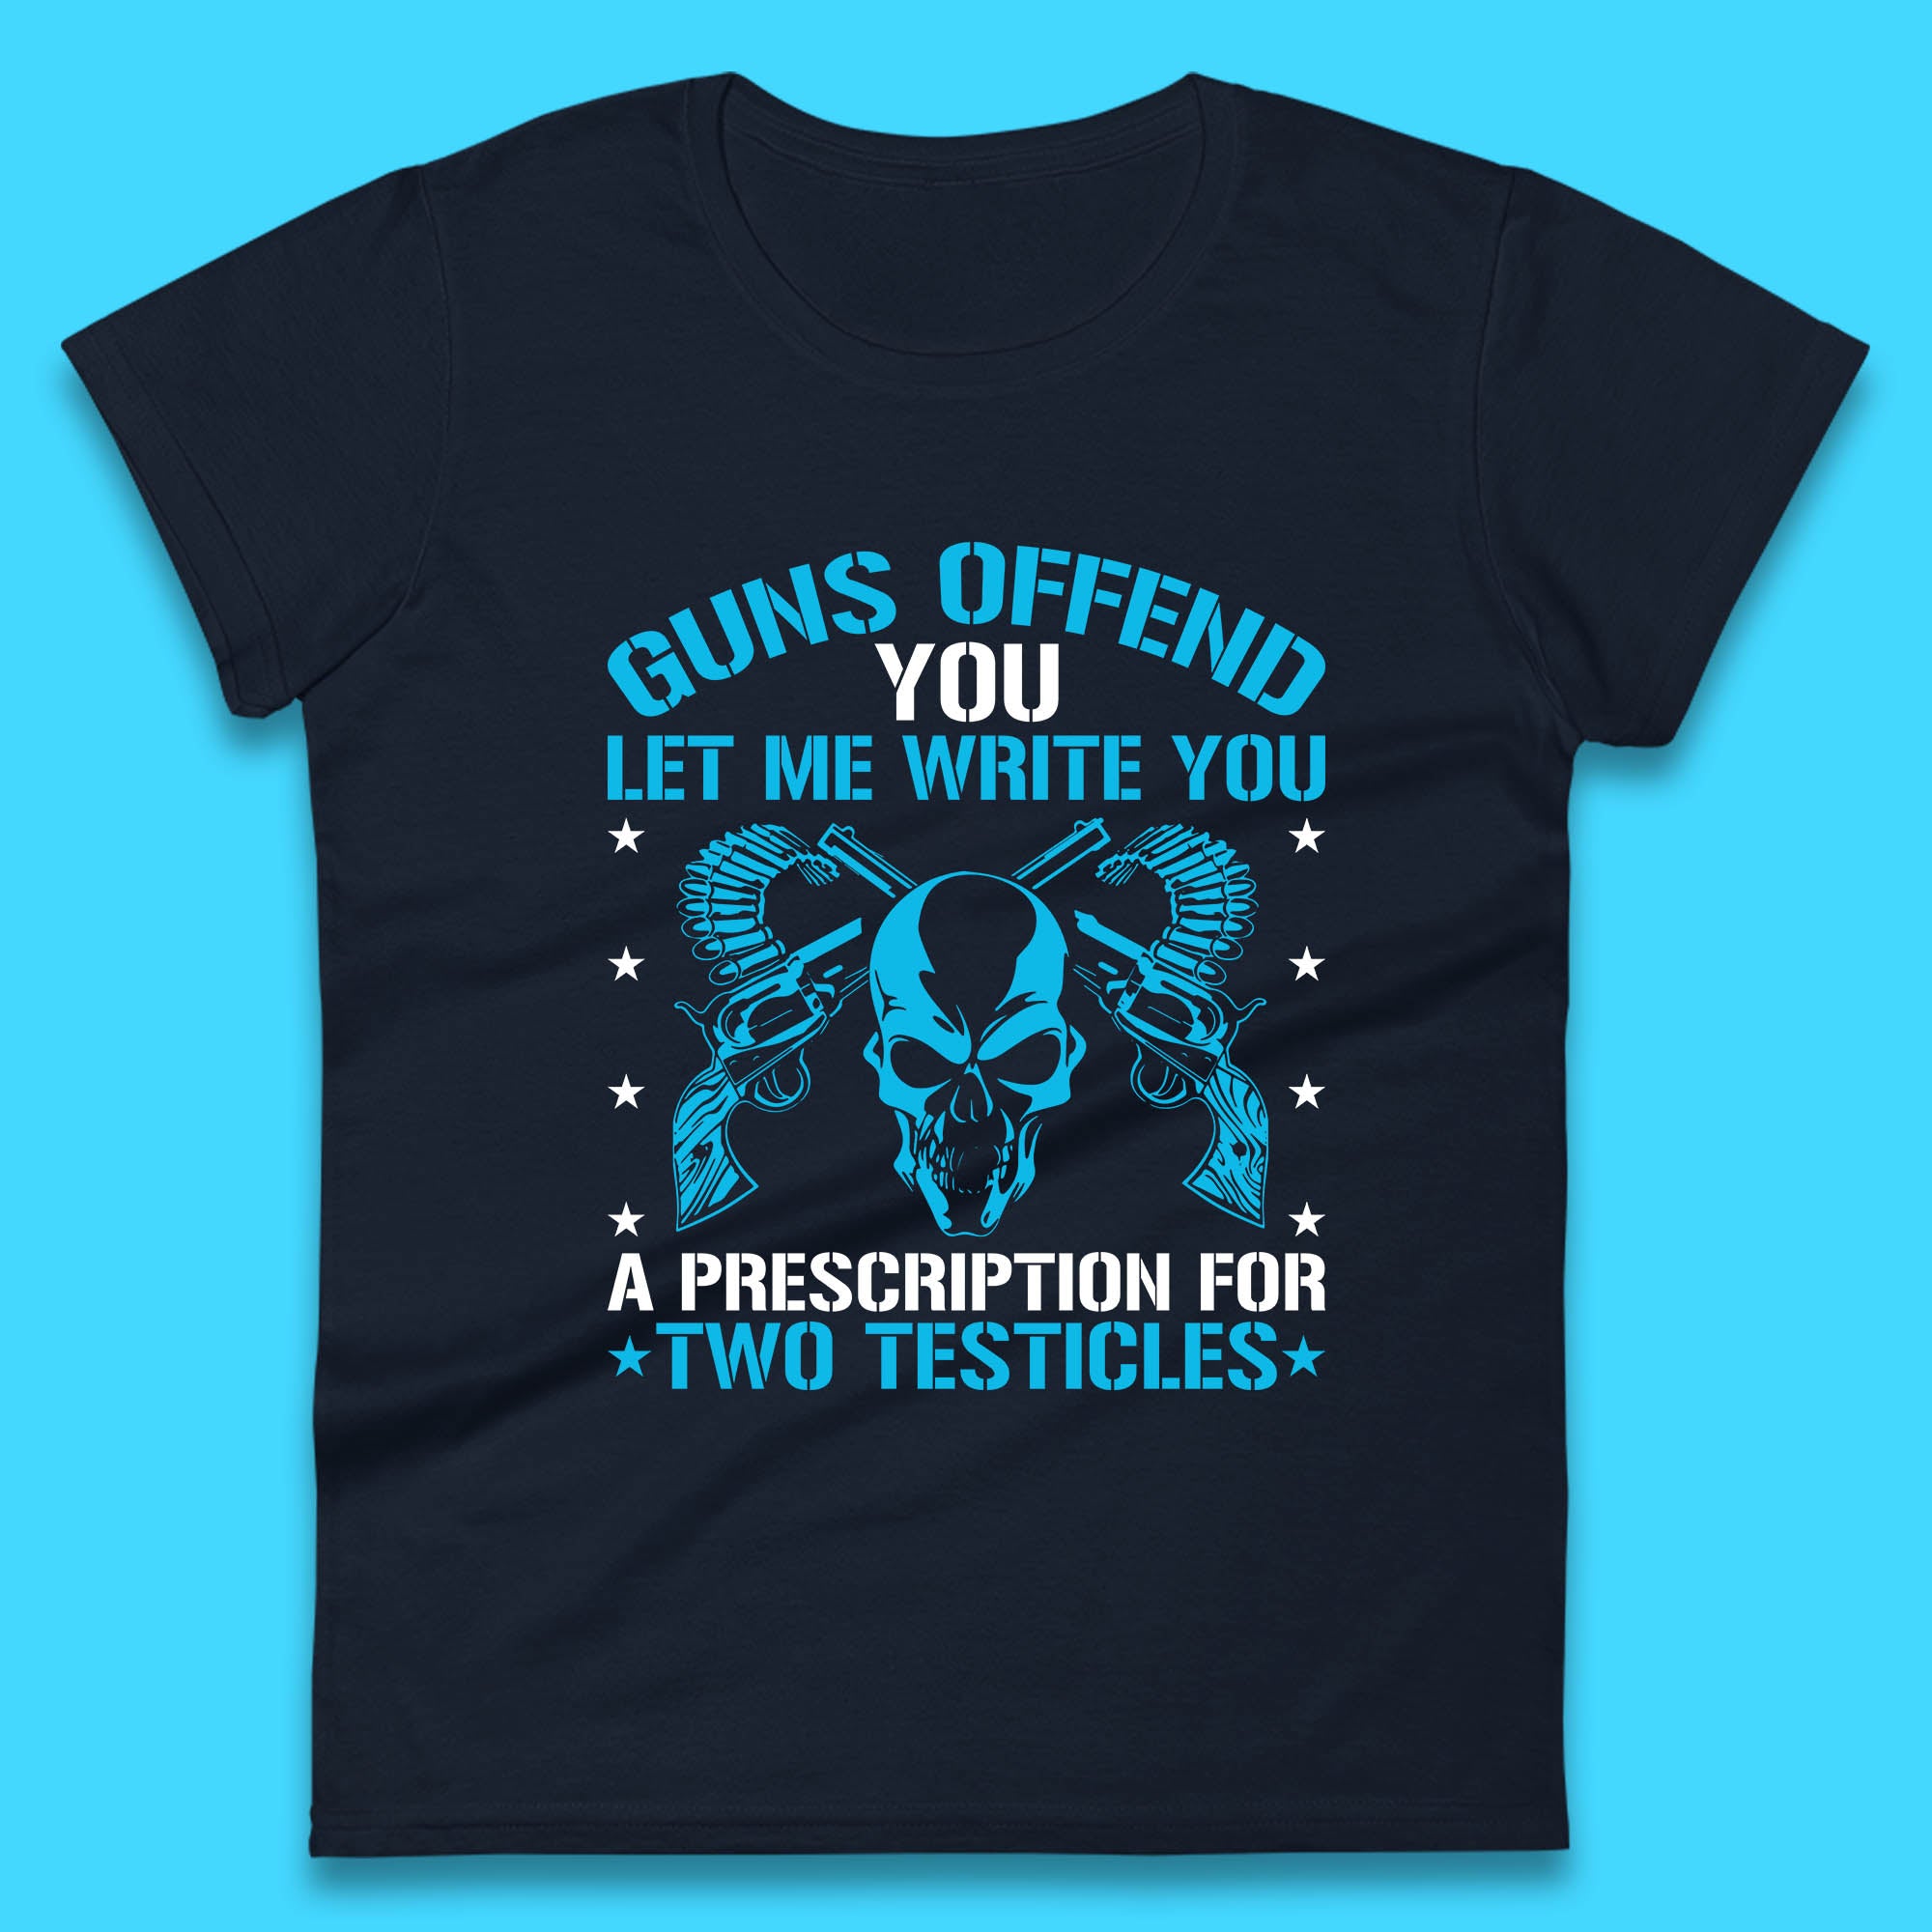 2nd Amendment Guns Offend You Let Me Write You A Prescription For Two Testicles Gun Rights Womens Tee Top